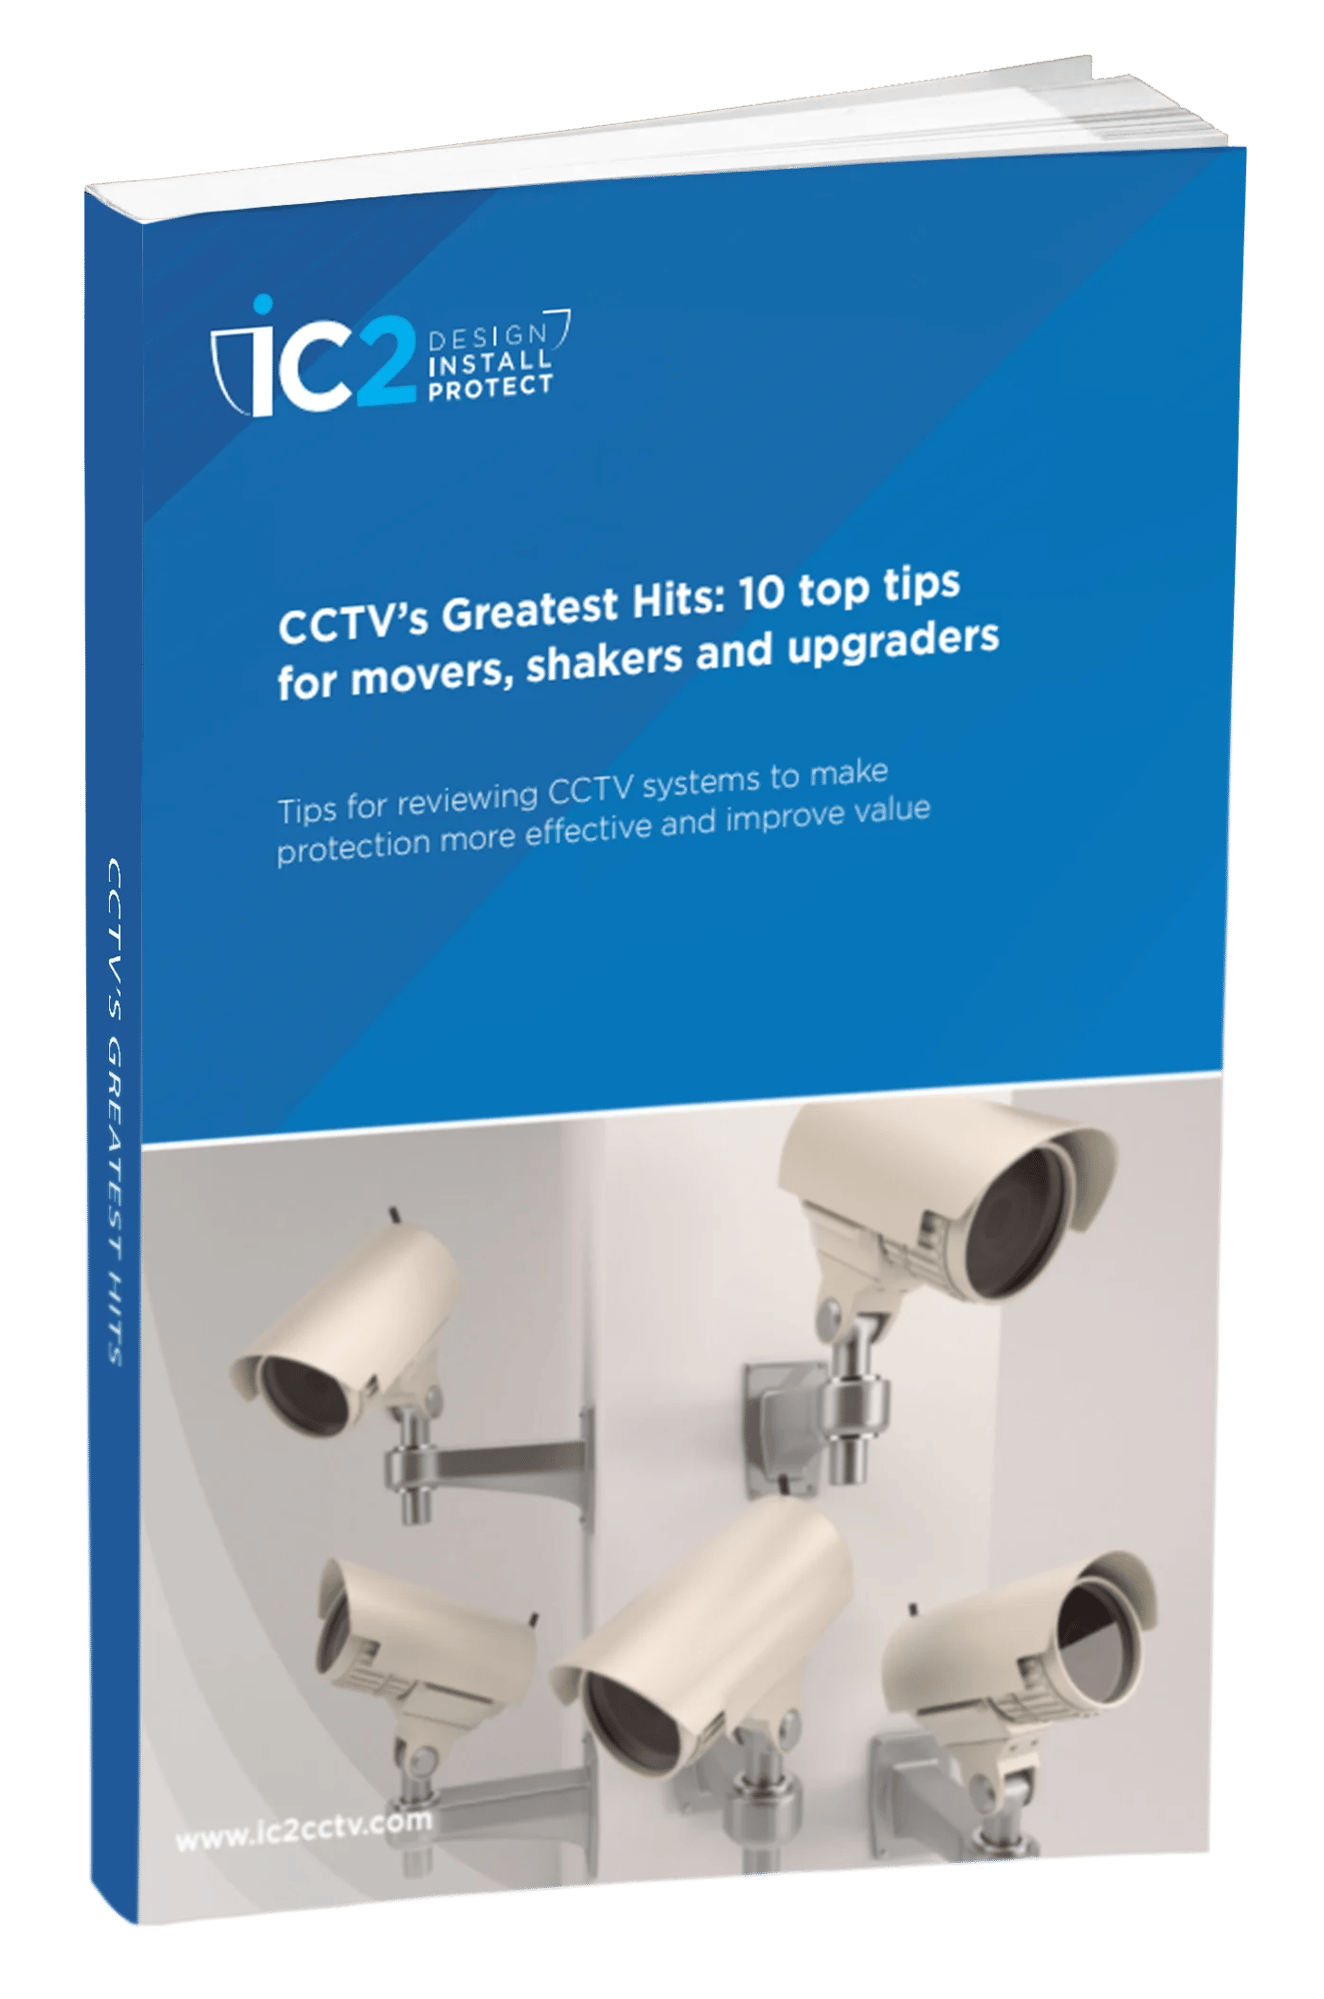 CCTV’s Greatest Hits Ebook Cover Guide